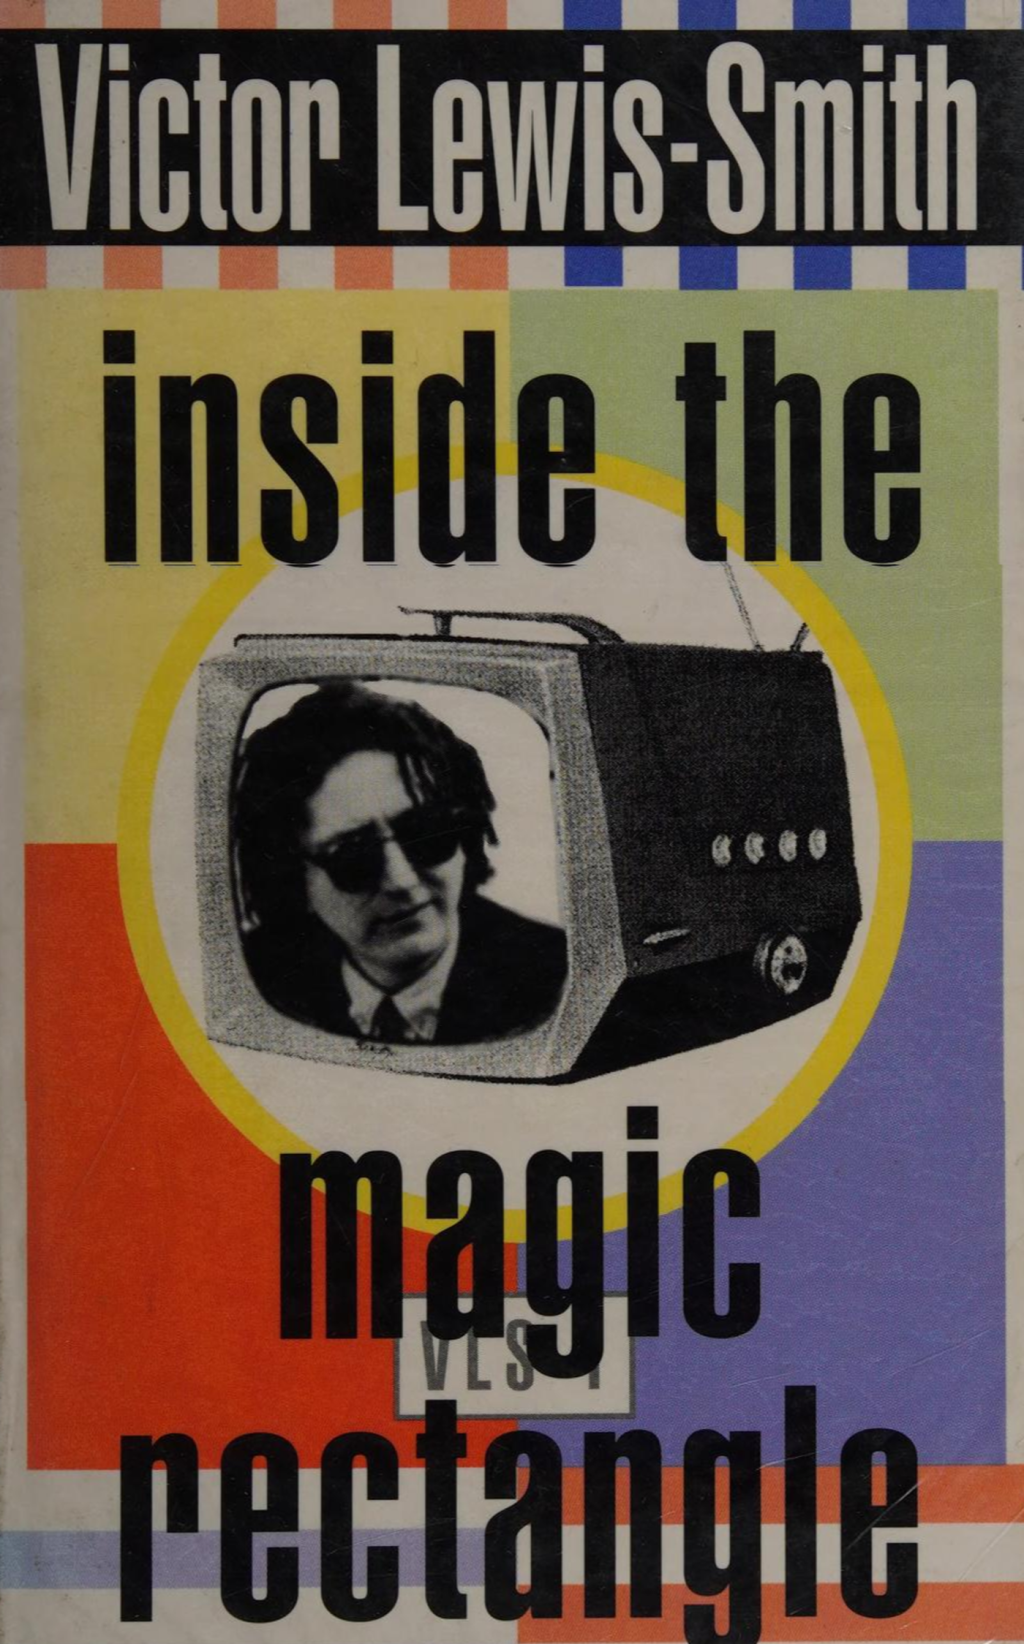 Inside The Magic Rectangle by Victor Lewis-Smith (Gollancz, 1995) - listen to Ricardo Autobahn and Tim Worthington talking about it in Looks Unfamiliar.